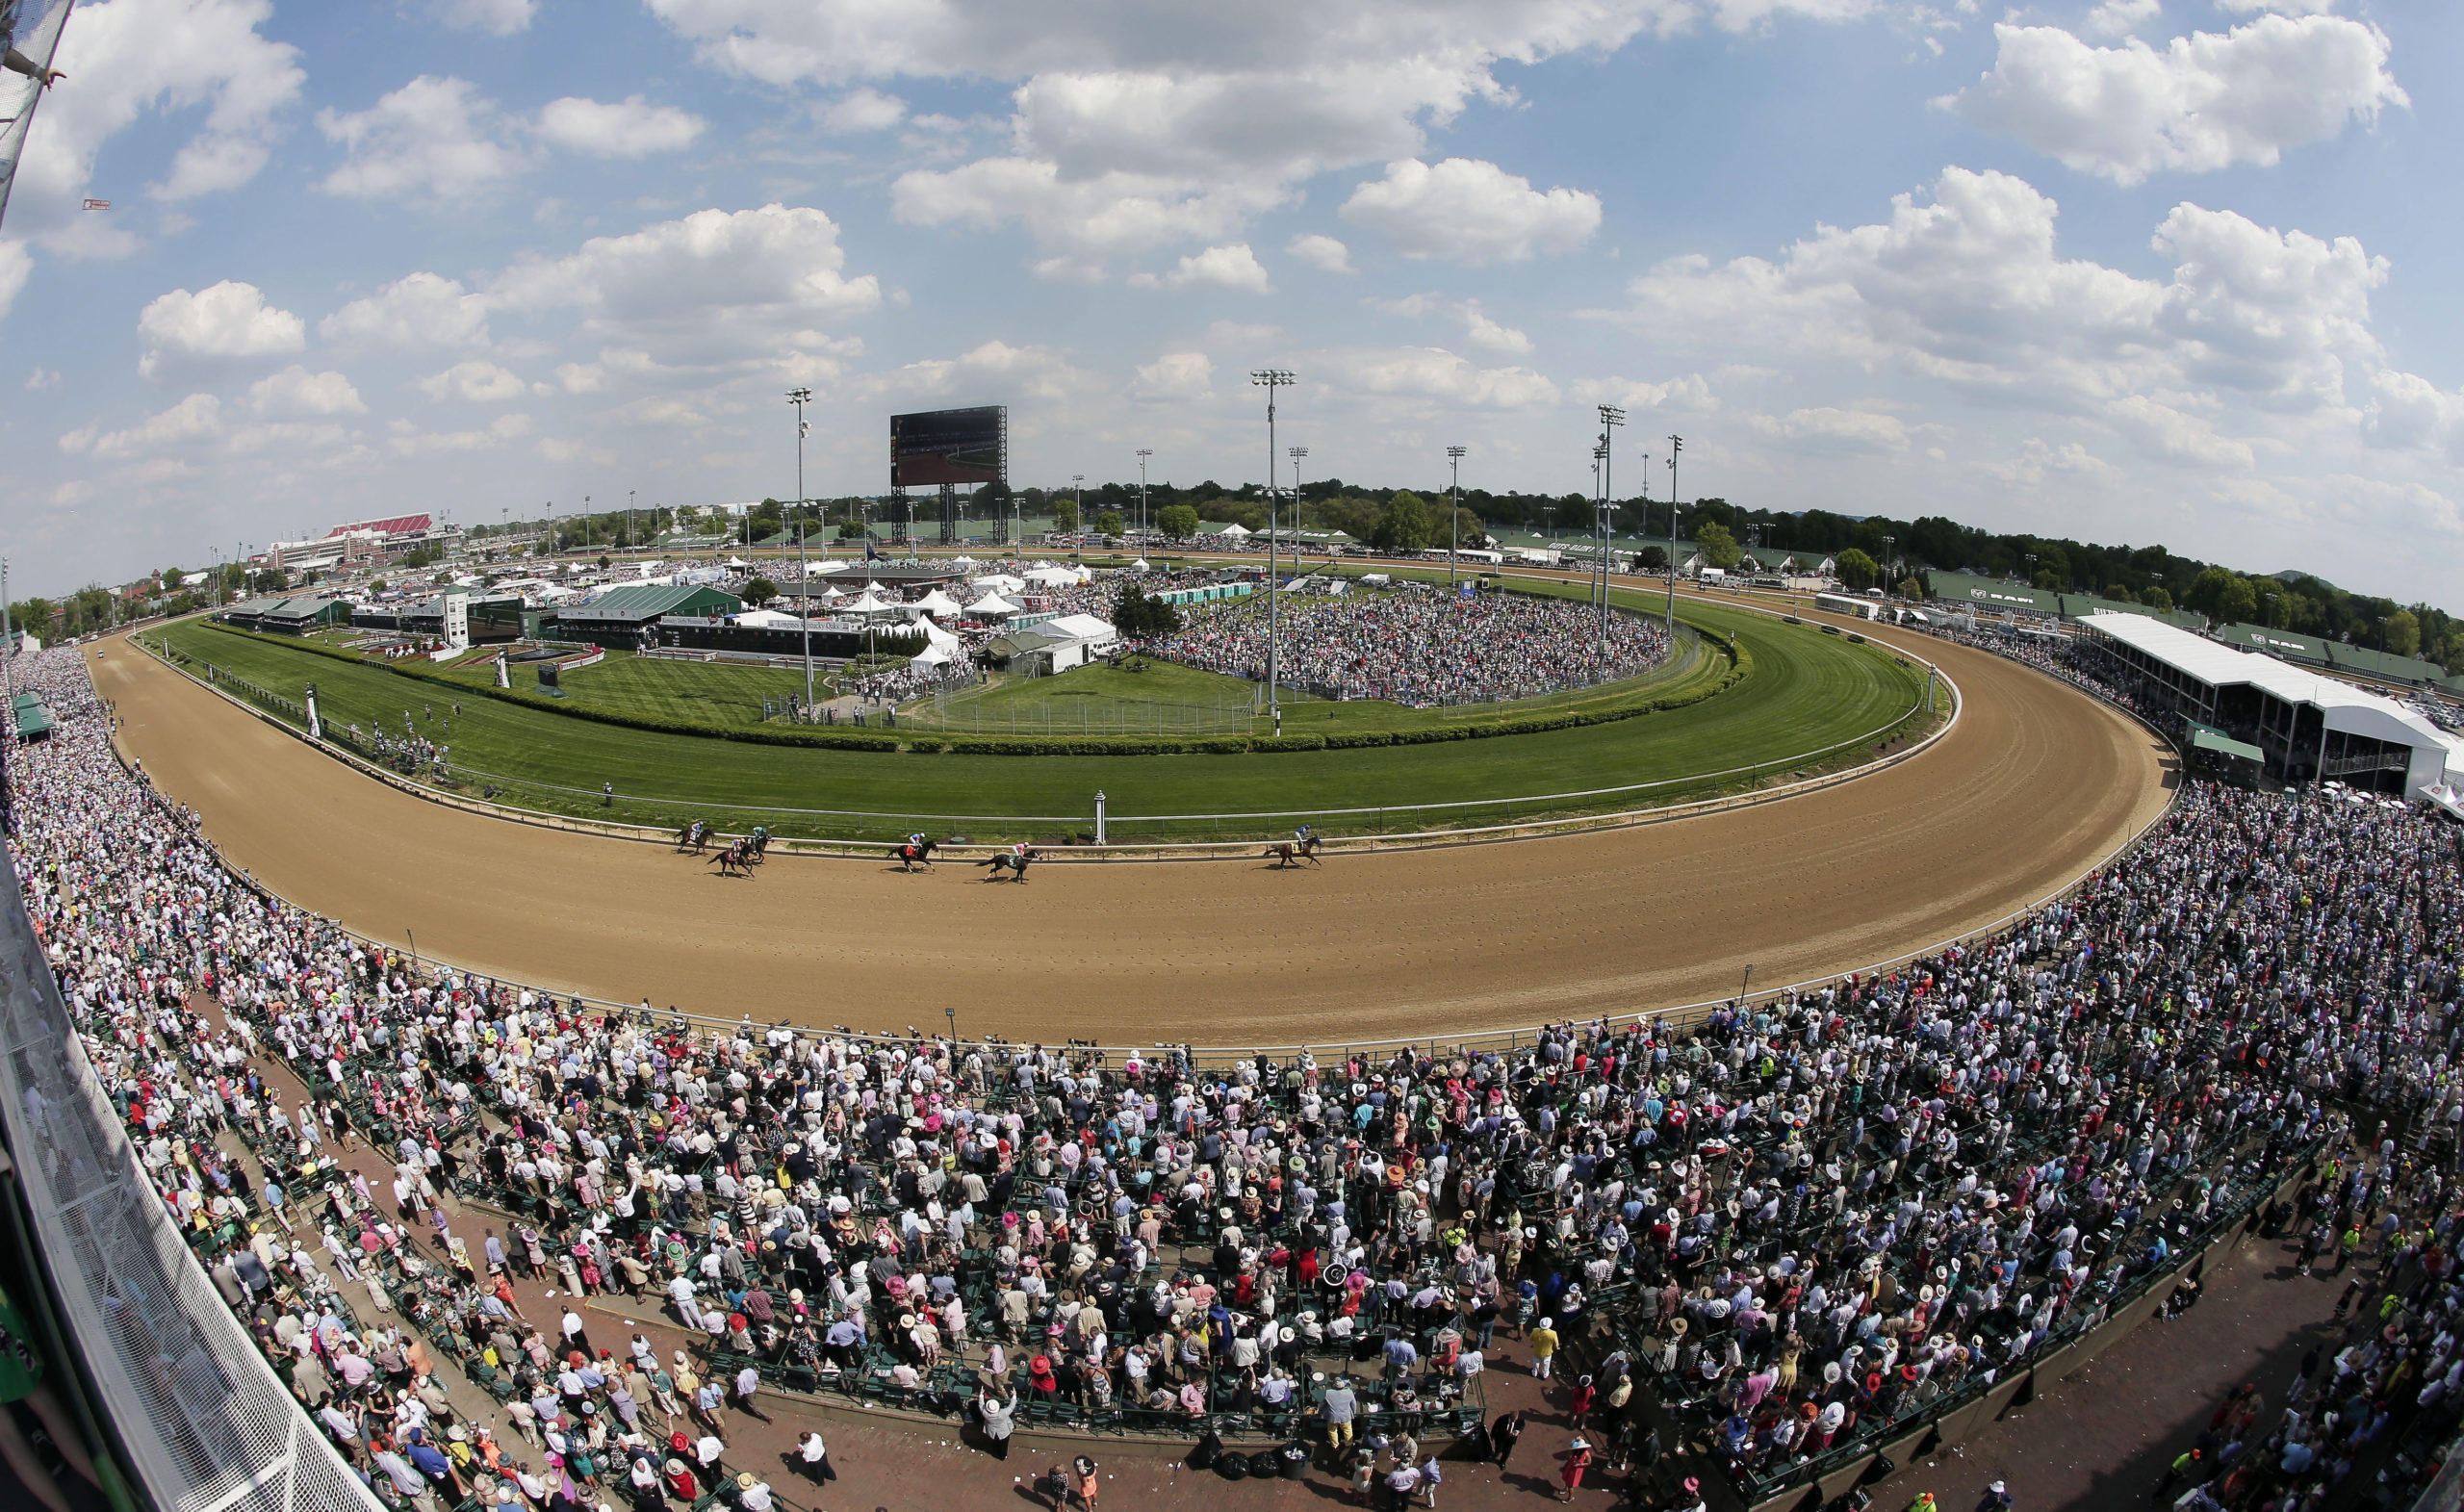 Fans watch a race before the 141st running of the Kentucky Derby horse race at Churchill Downs in Louisville, Kentucky, on May 2, 2015.